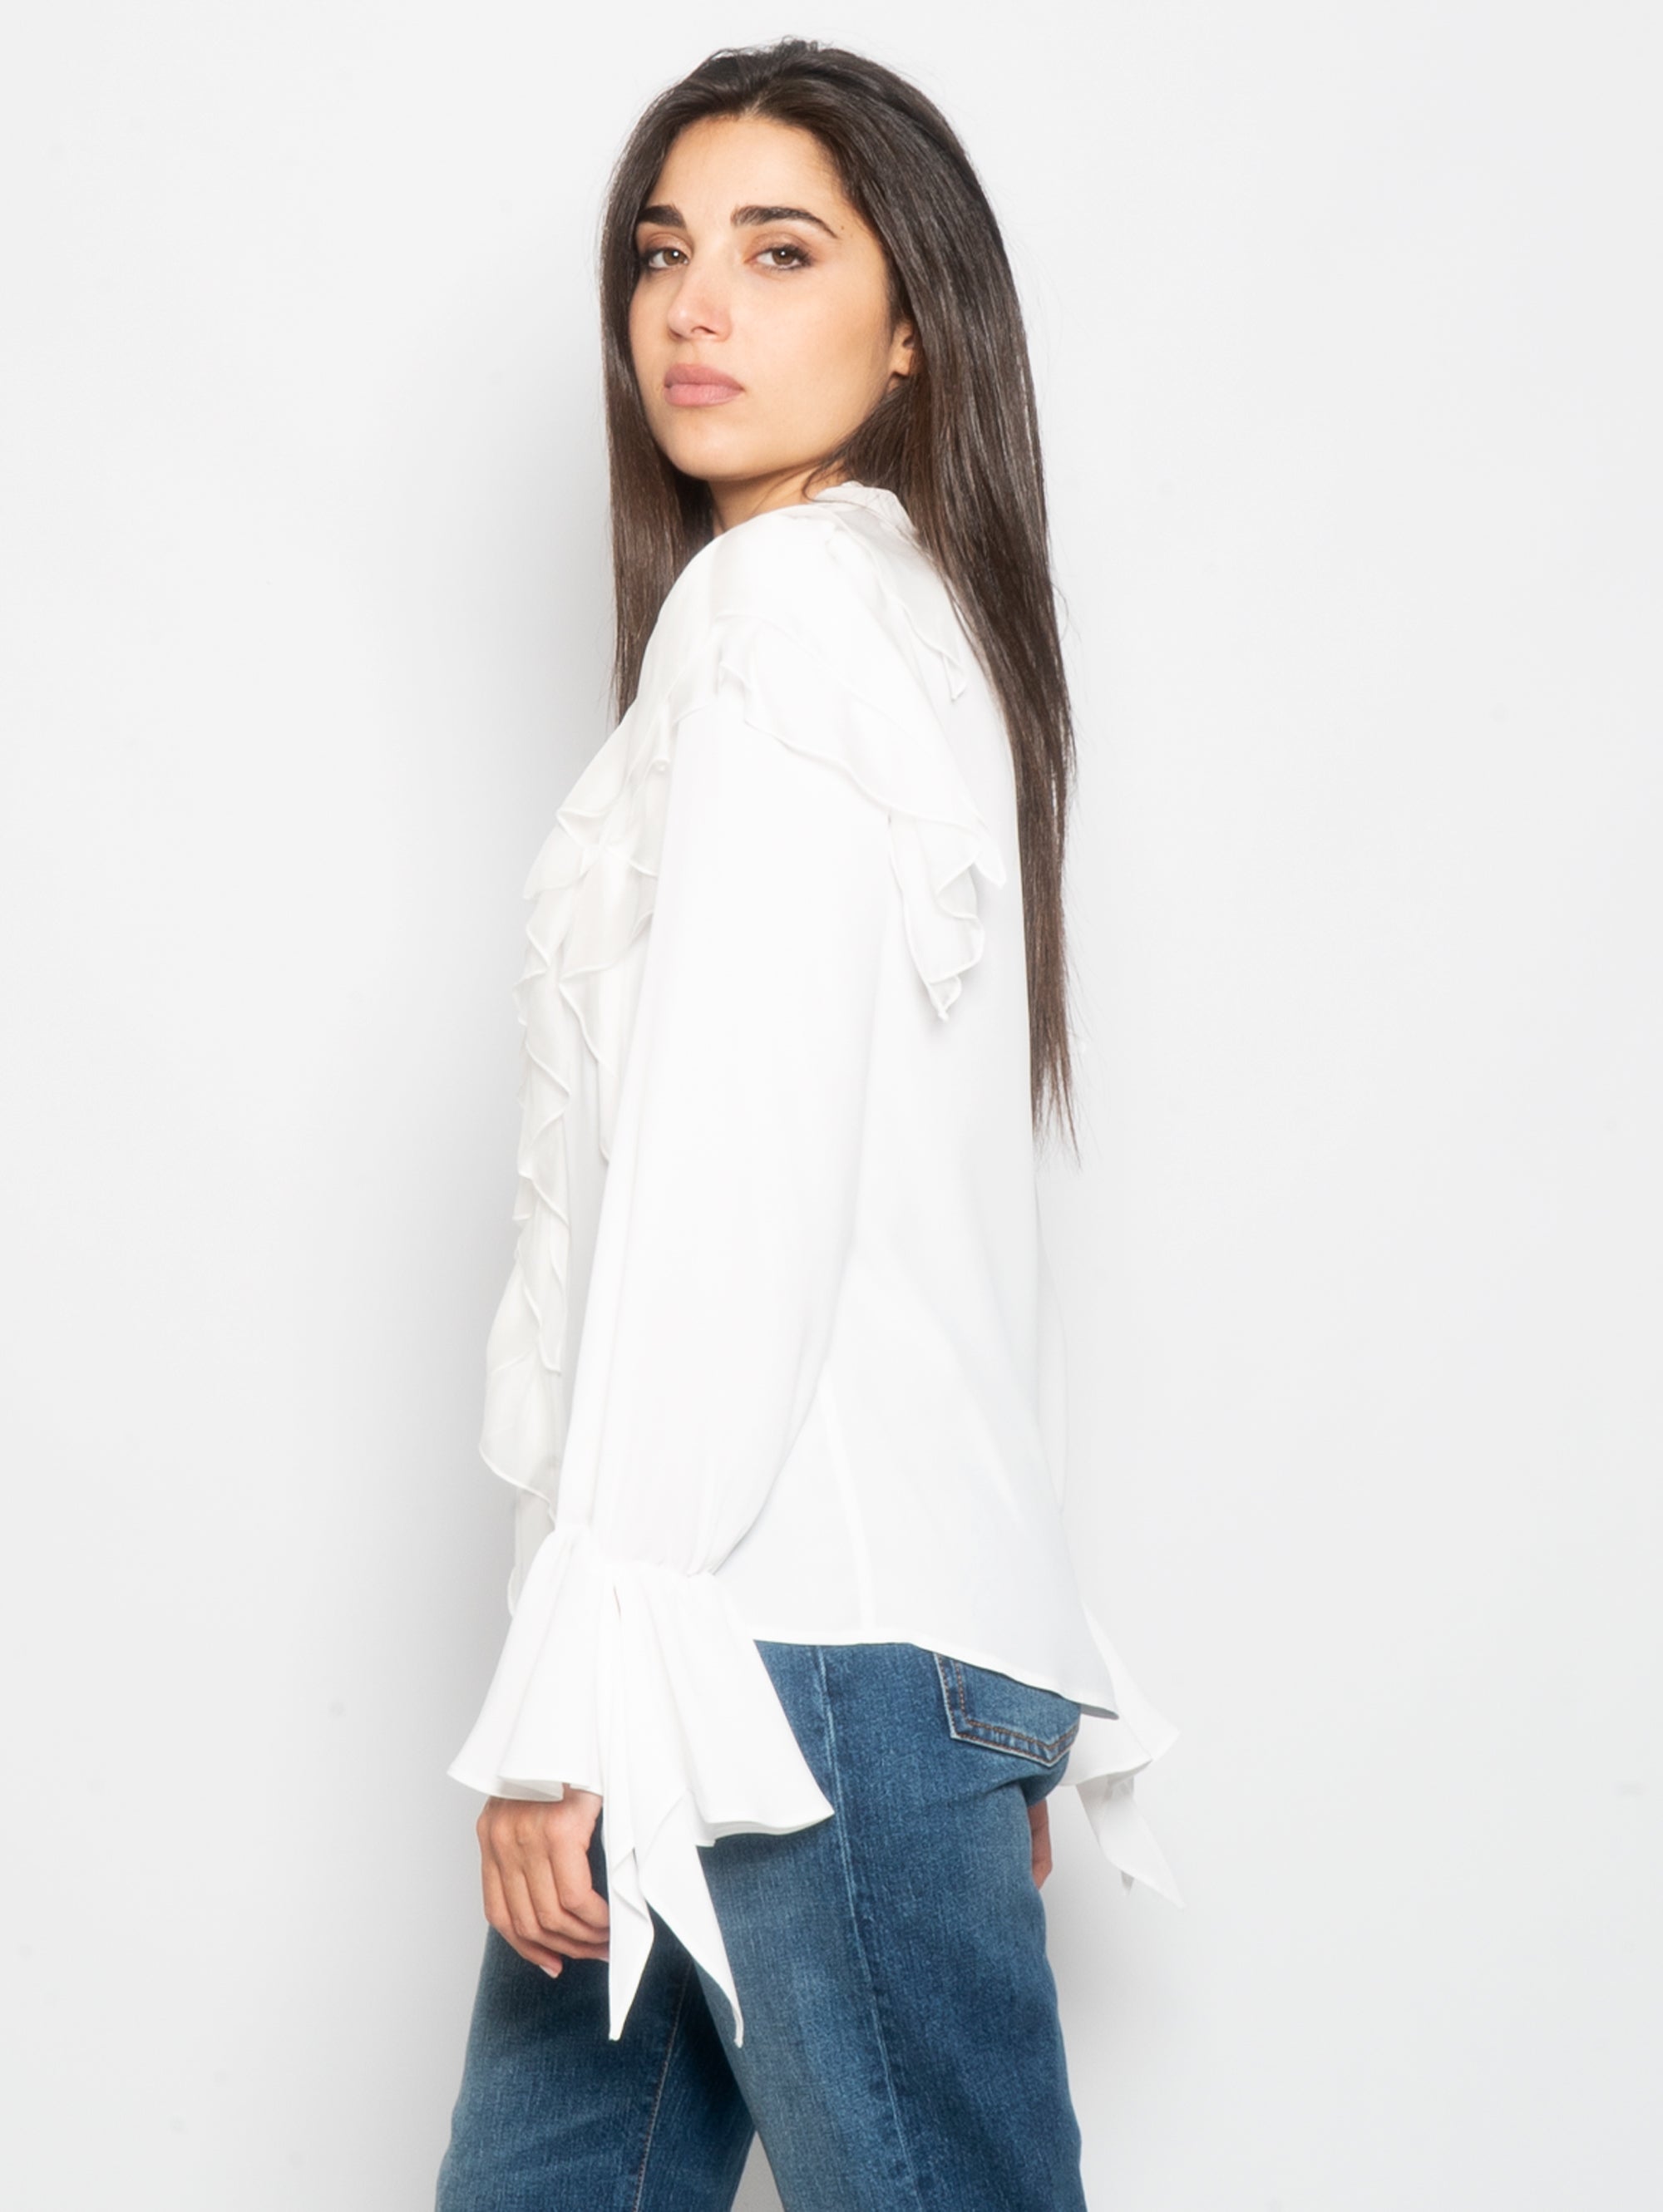 Blouse with Cascade of White Ruffles